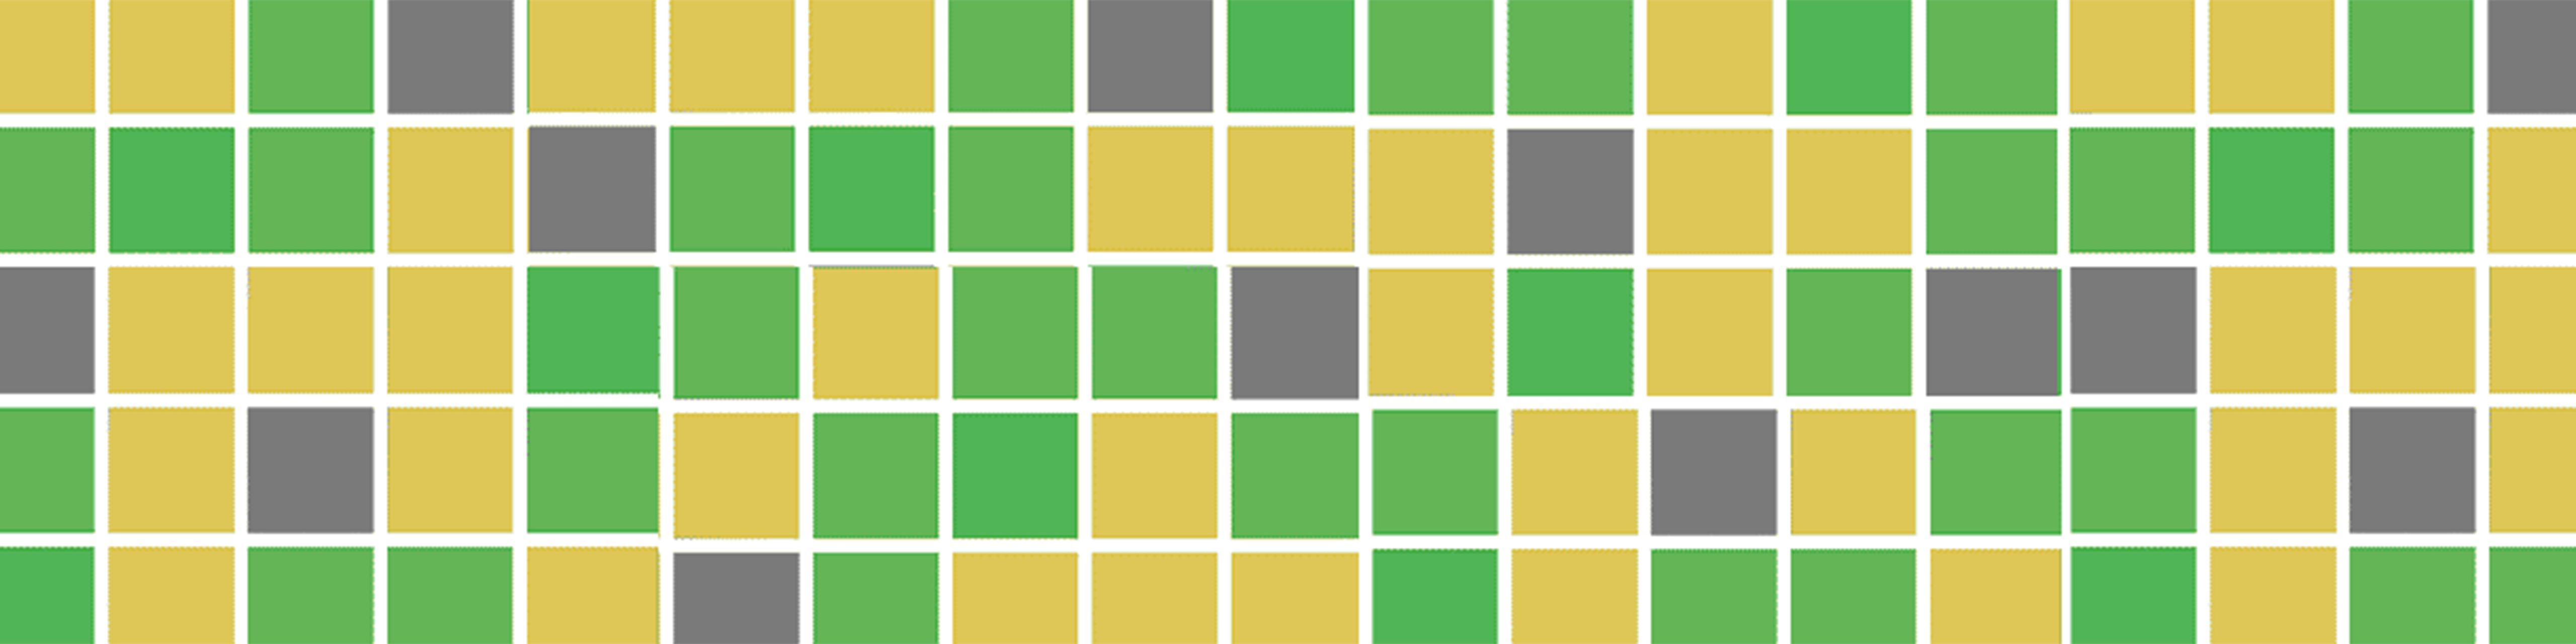 Grid of orange, green, and gray squares